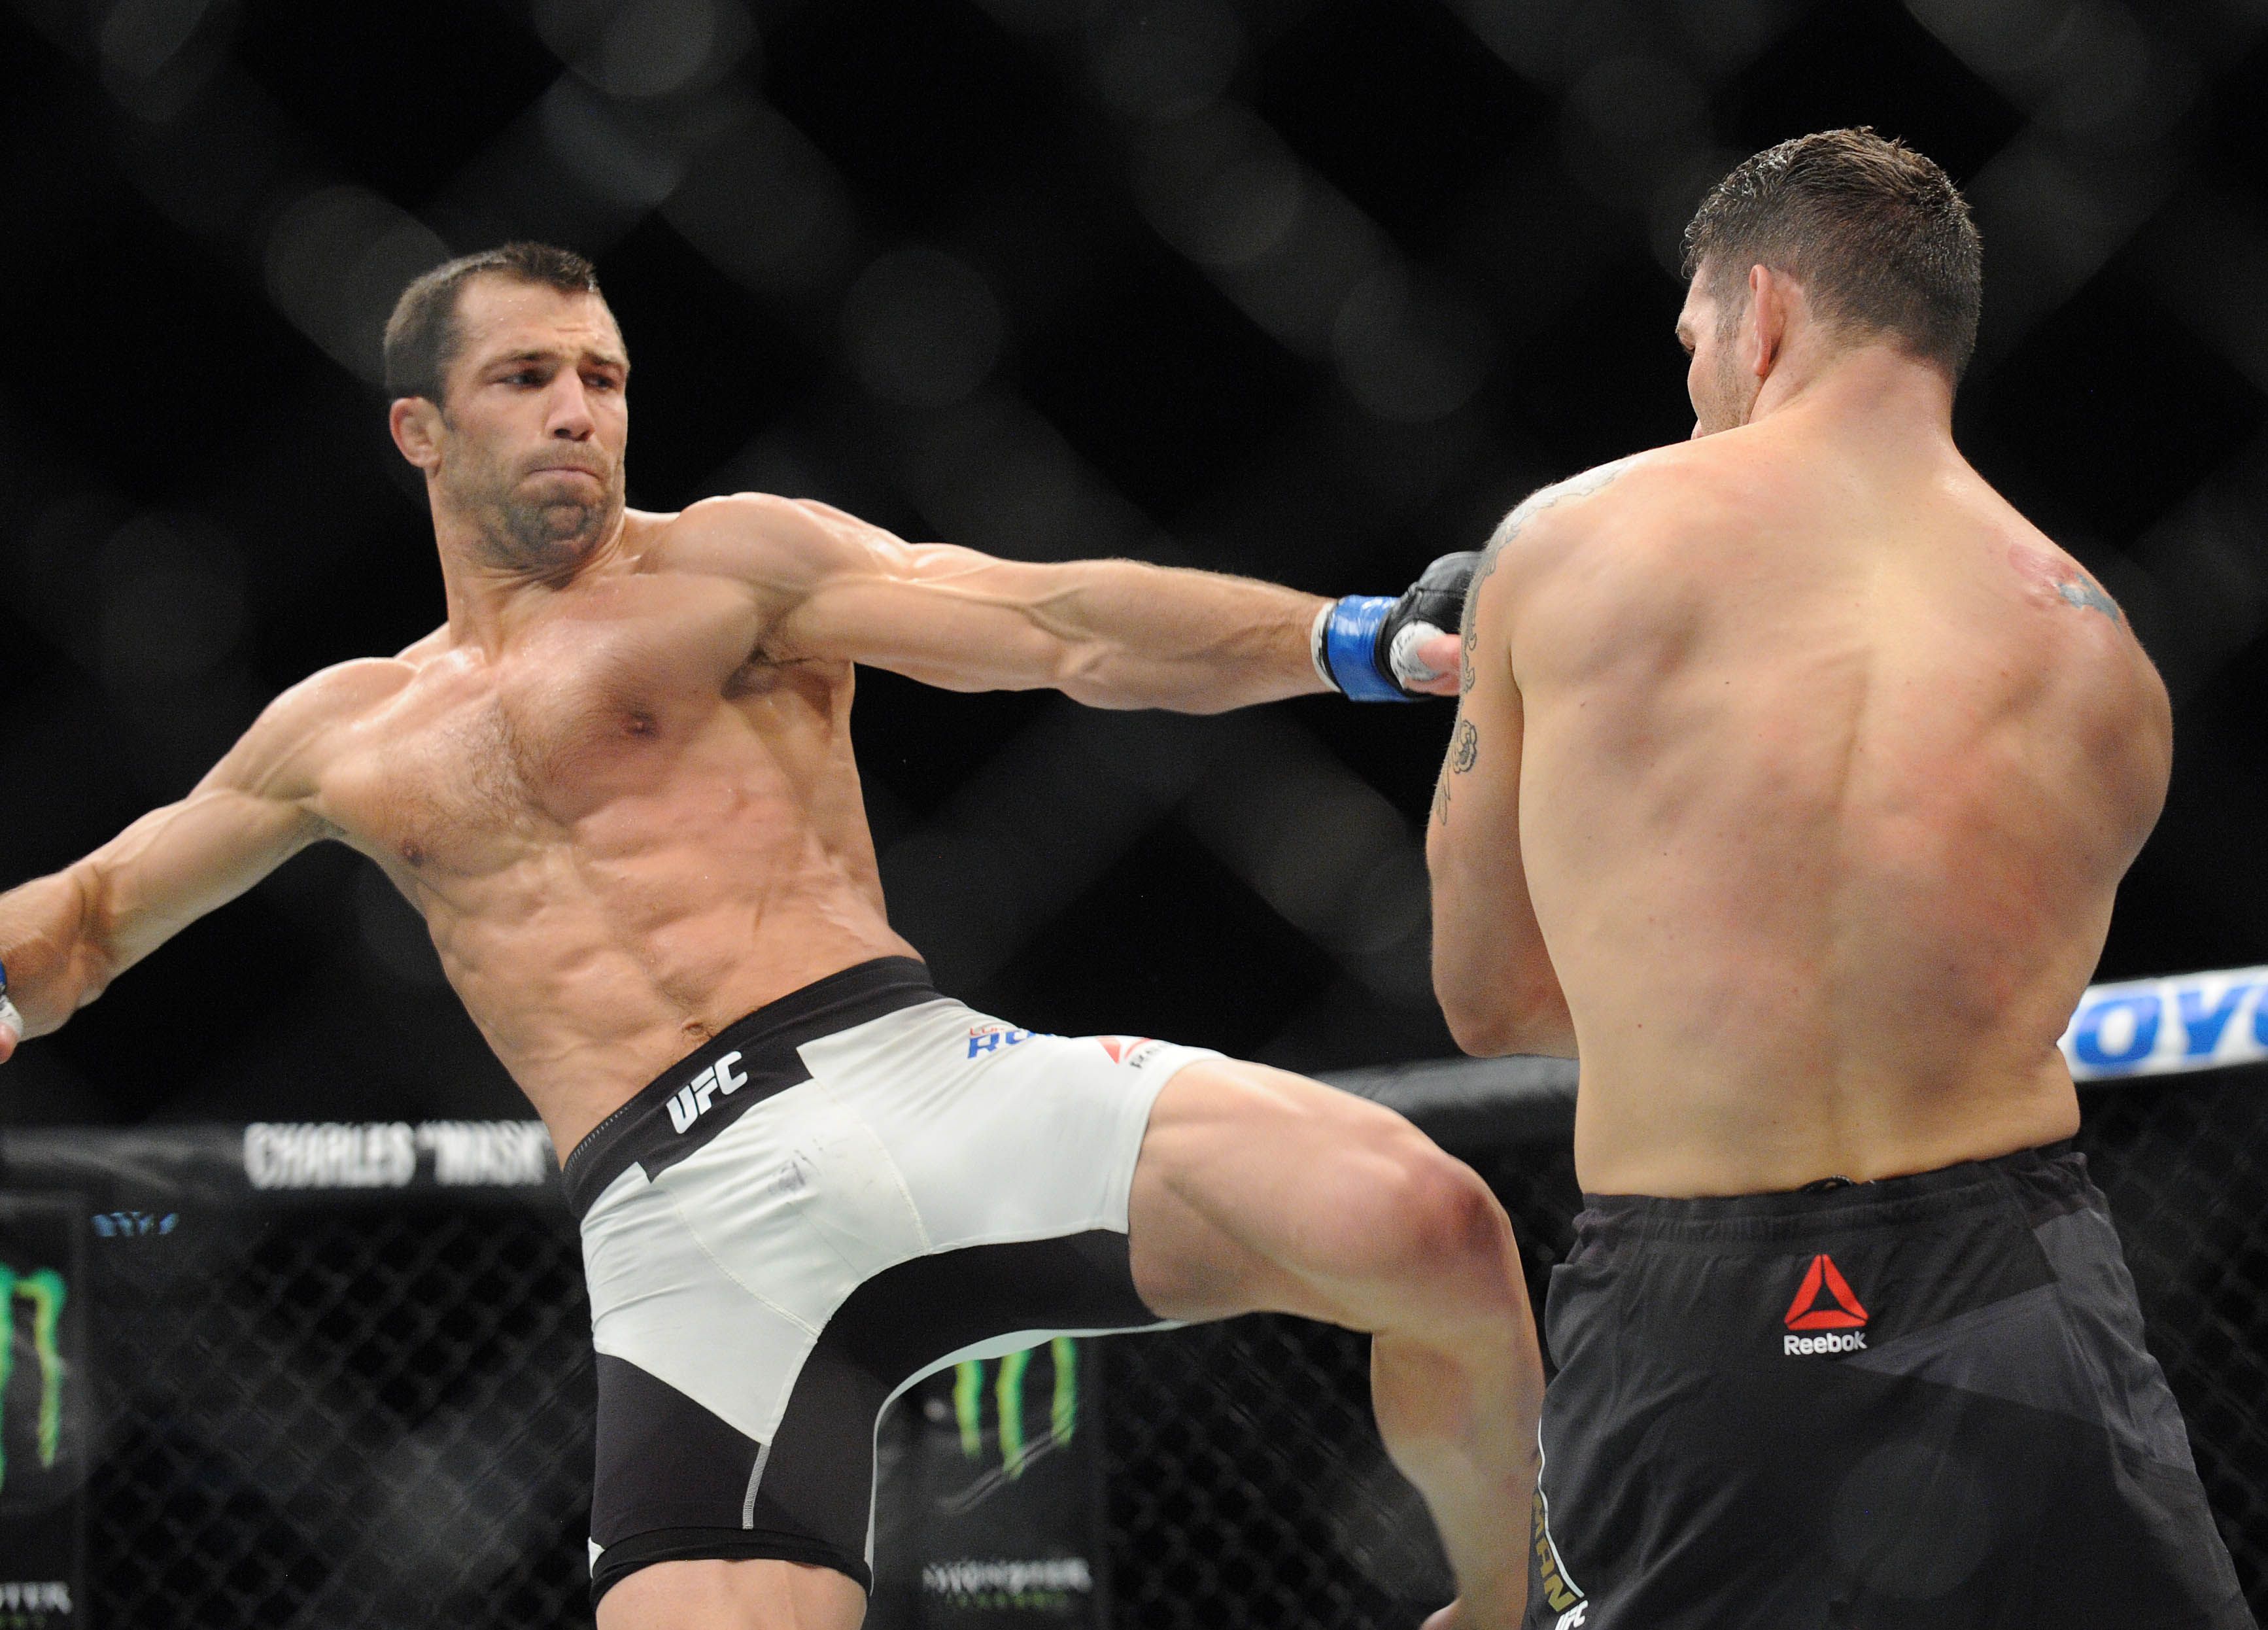 10 UFC Fighters With The Best Double Leg Takedown